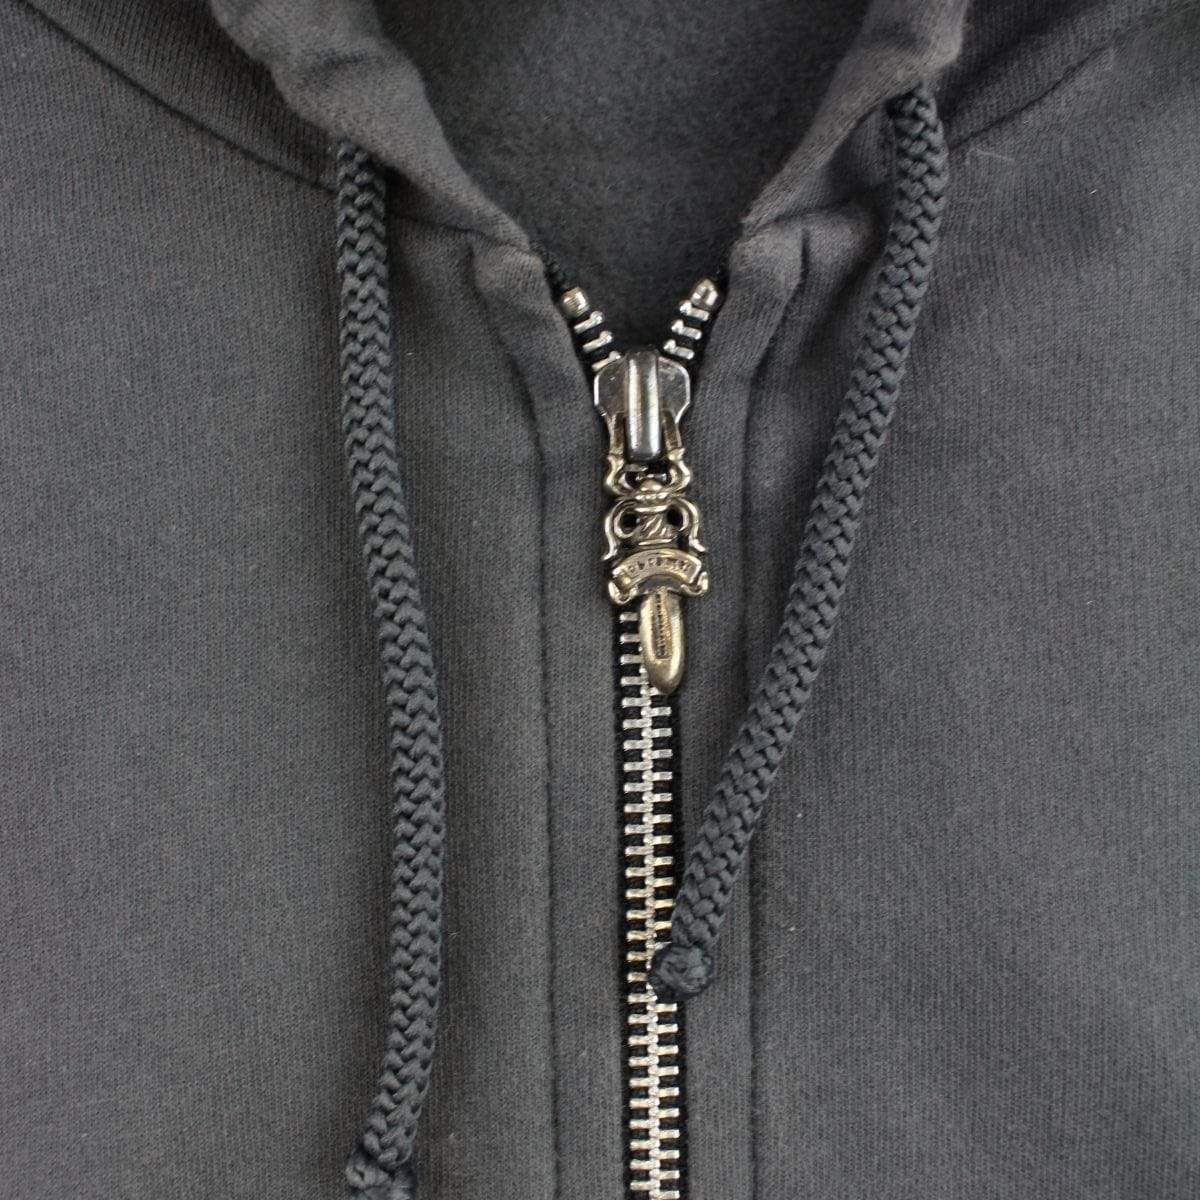 chrome hearts classic crosses hoodie grey - SaruGeneral